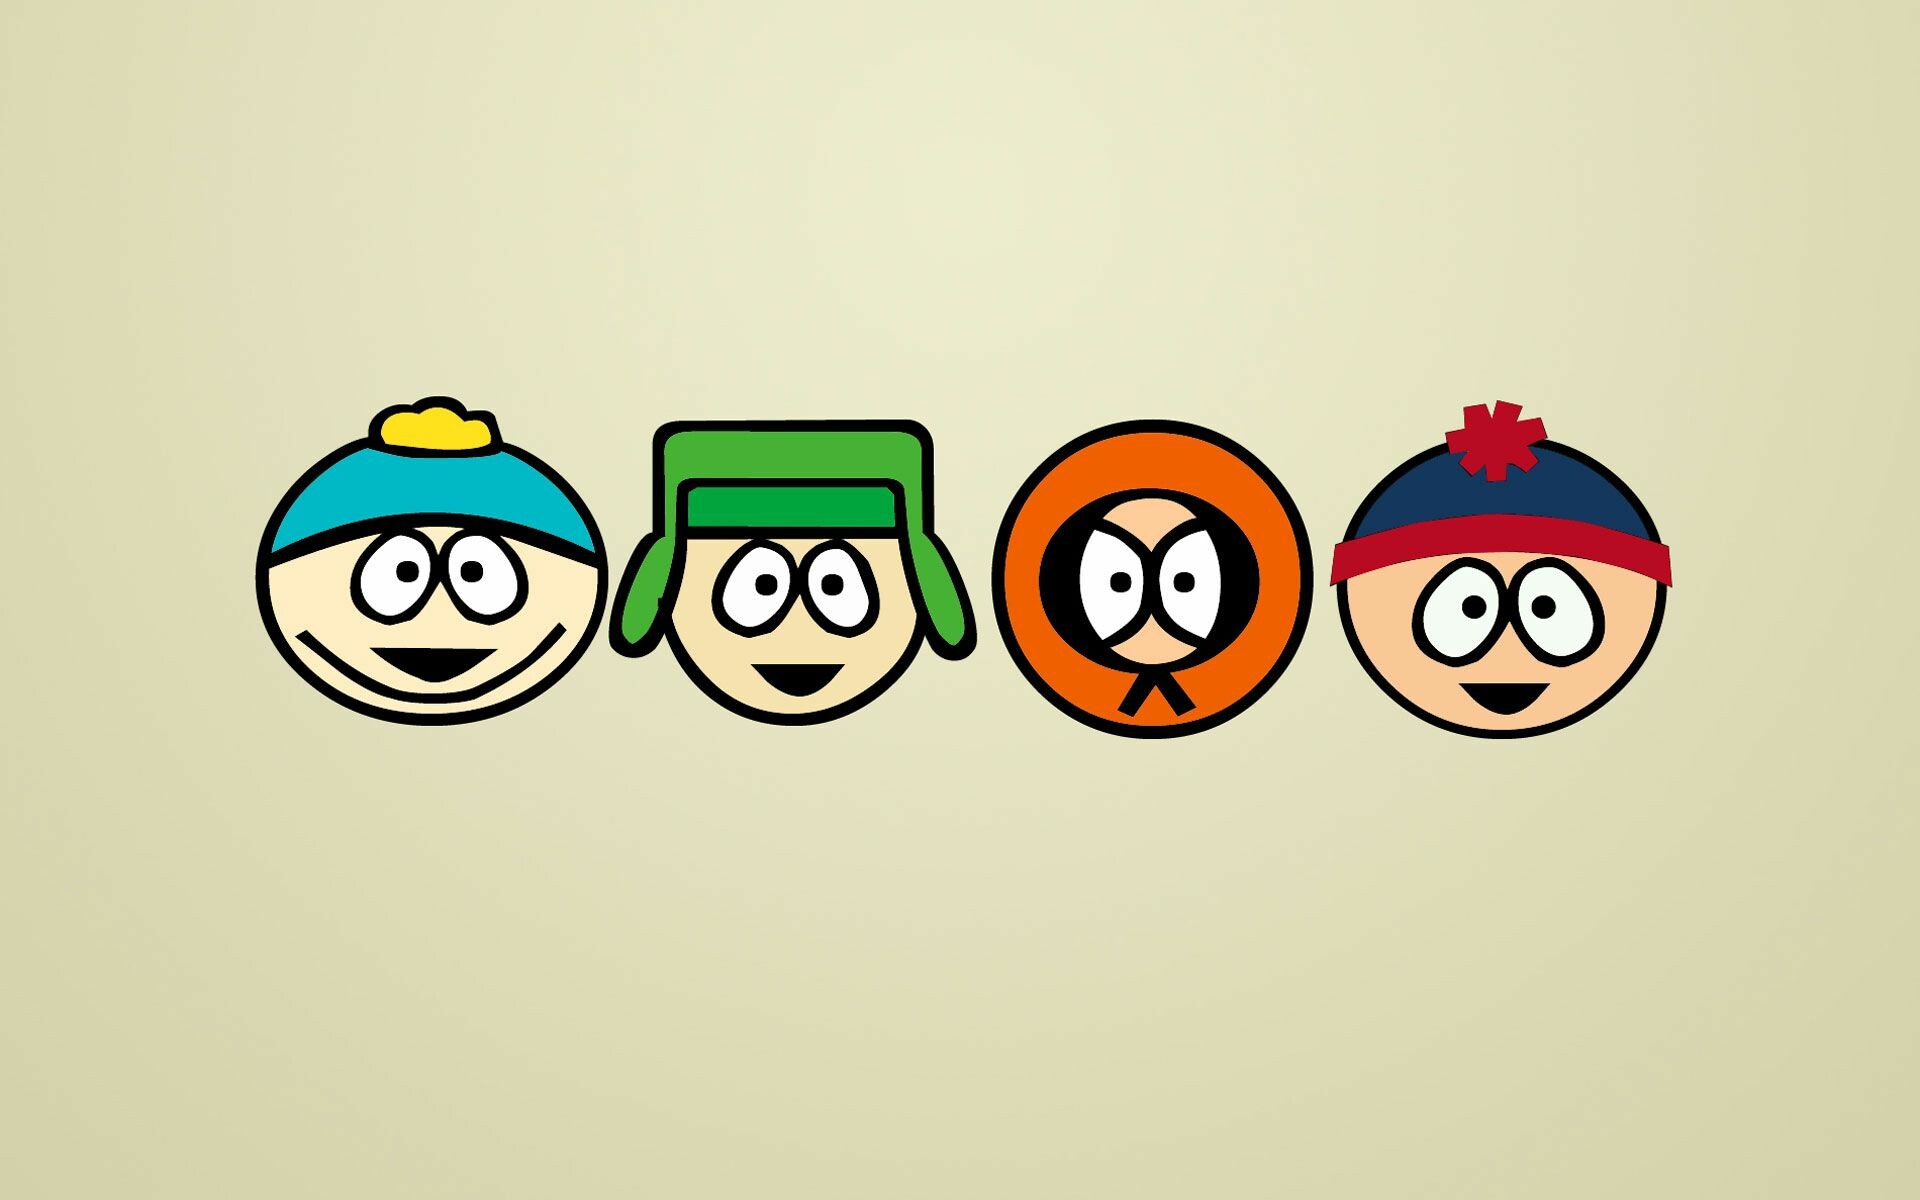 South Park: Cartman, Kyle, Kenny, and Stan, Adult animation. 1920x1200 HD Wallpaper.